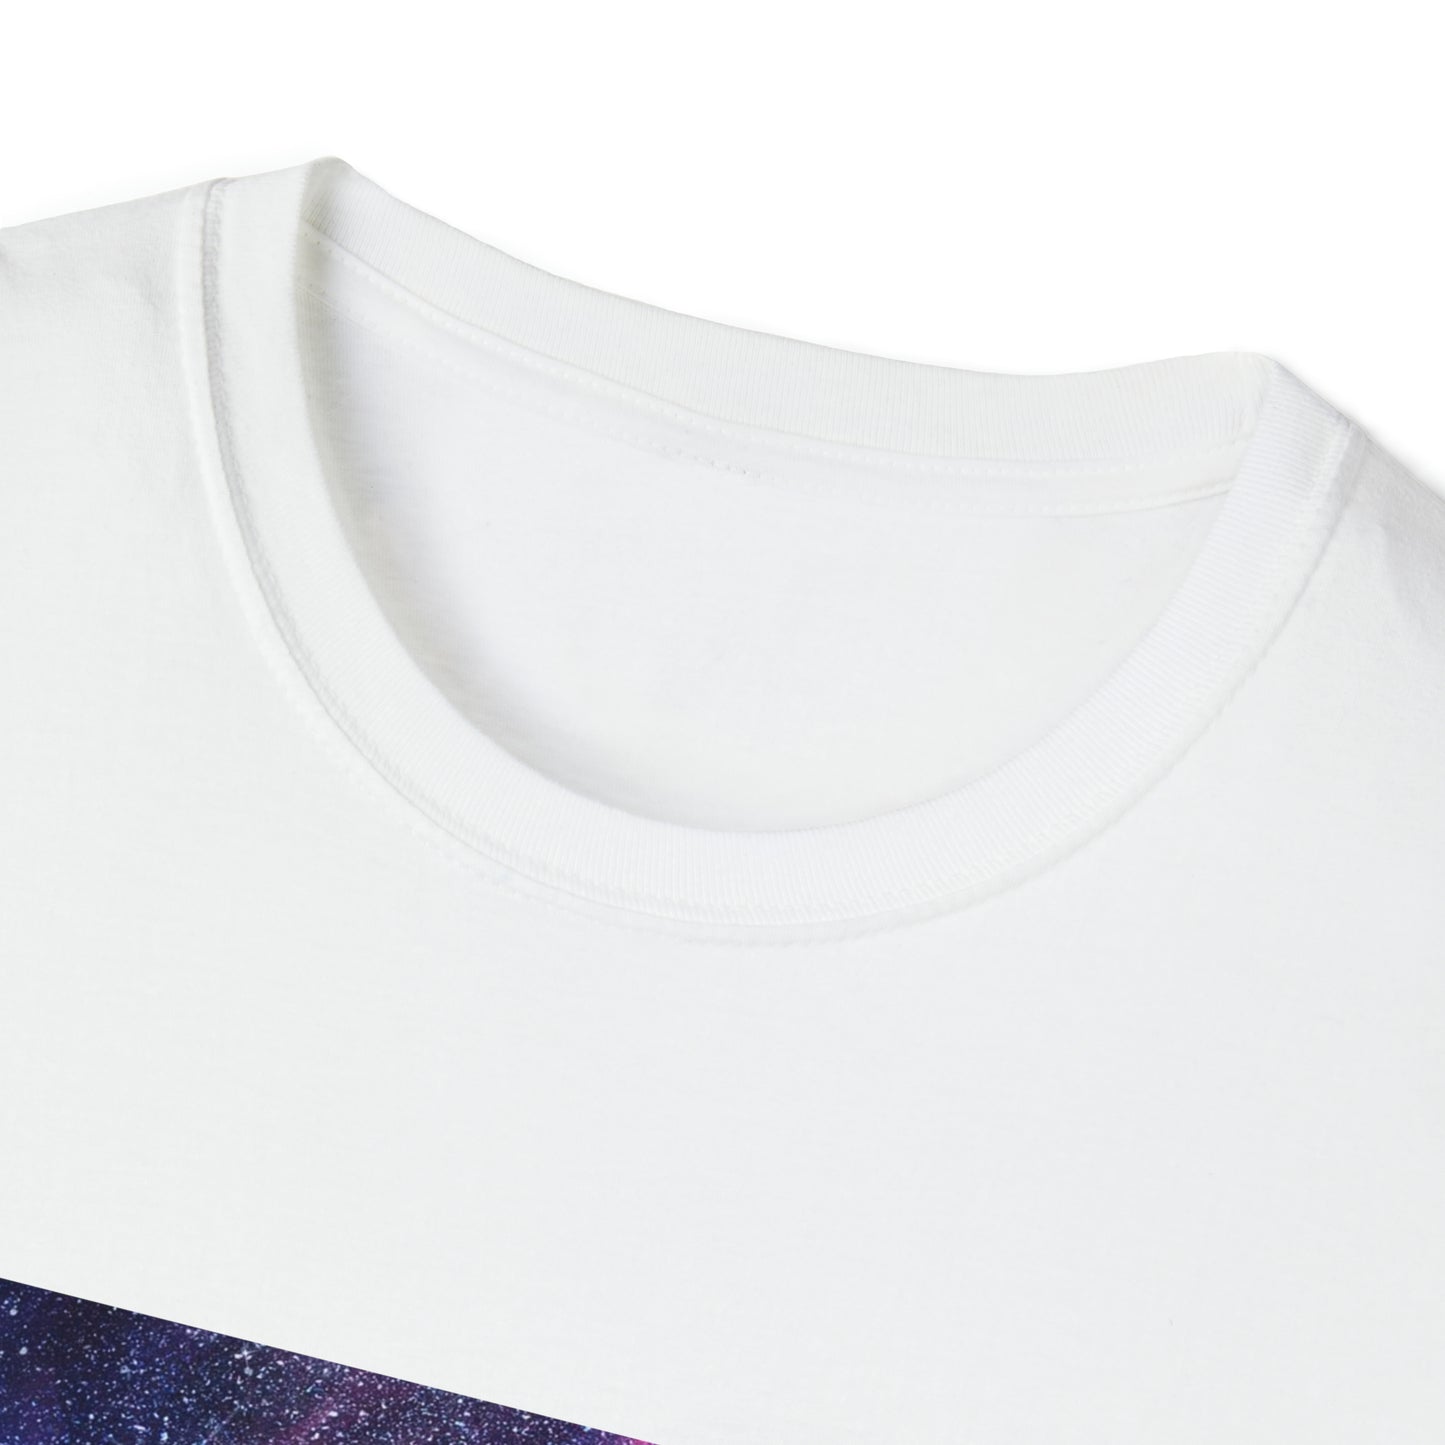 Out of this world Astronaut T-shirt